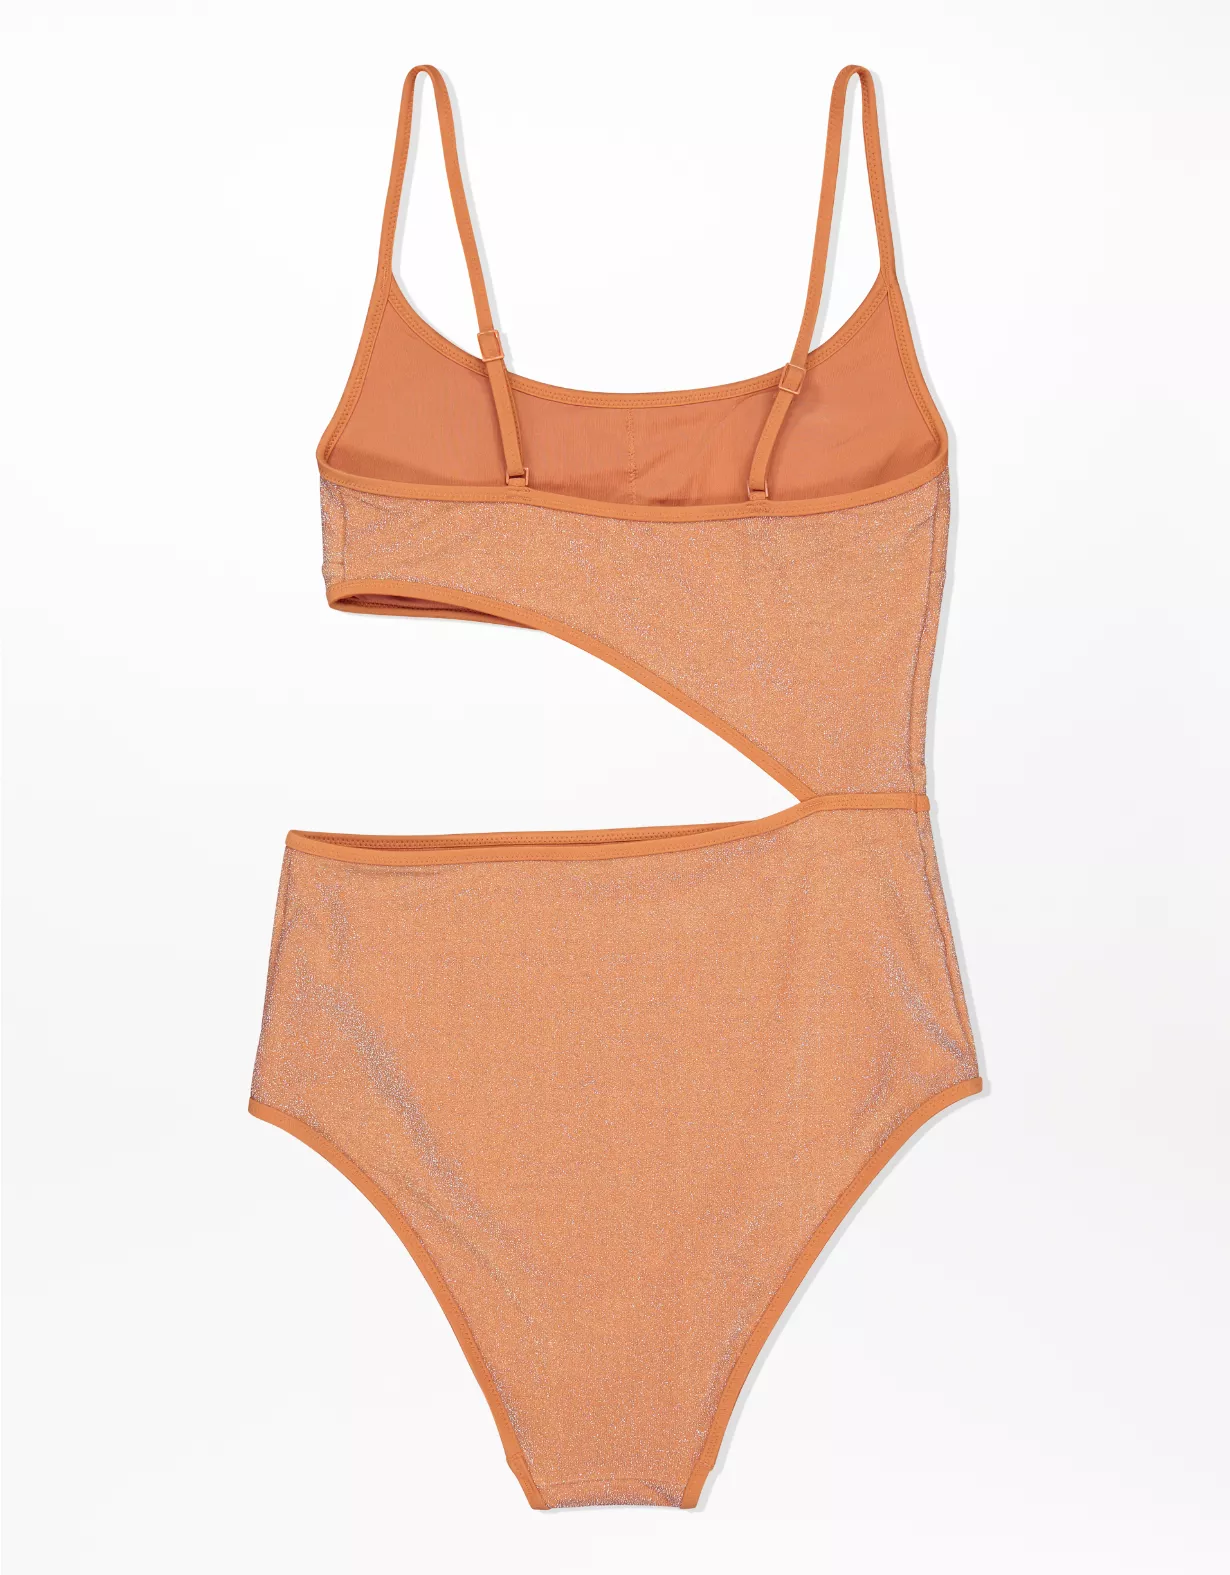 Aerie Shine Cut Out Scoop One Piece Swimsuit